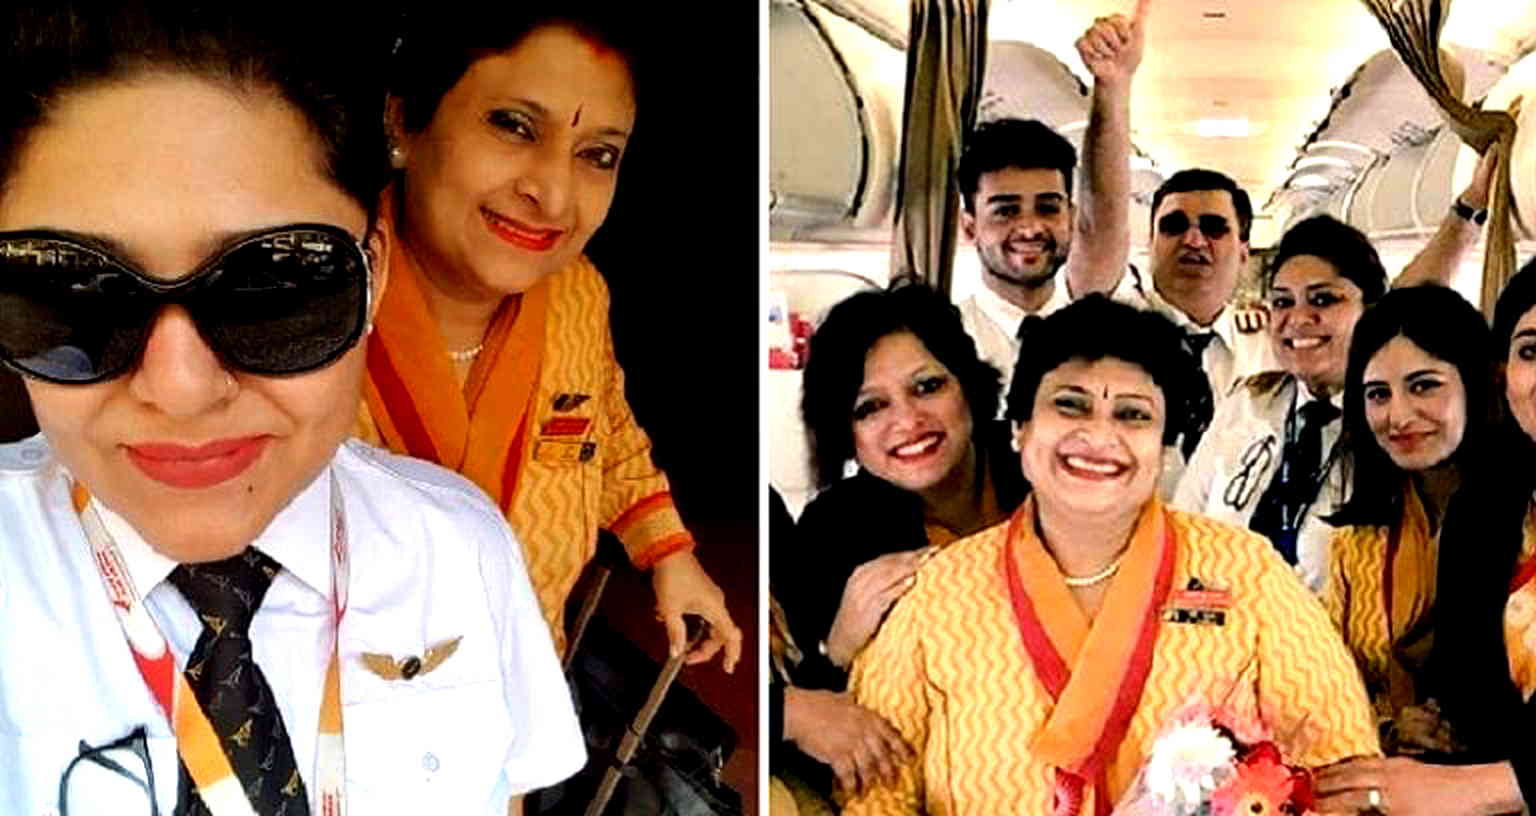 Flight Attendant’s Dream of Flying With Her Pilot Daughter Comes True on Her Last Day At Work